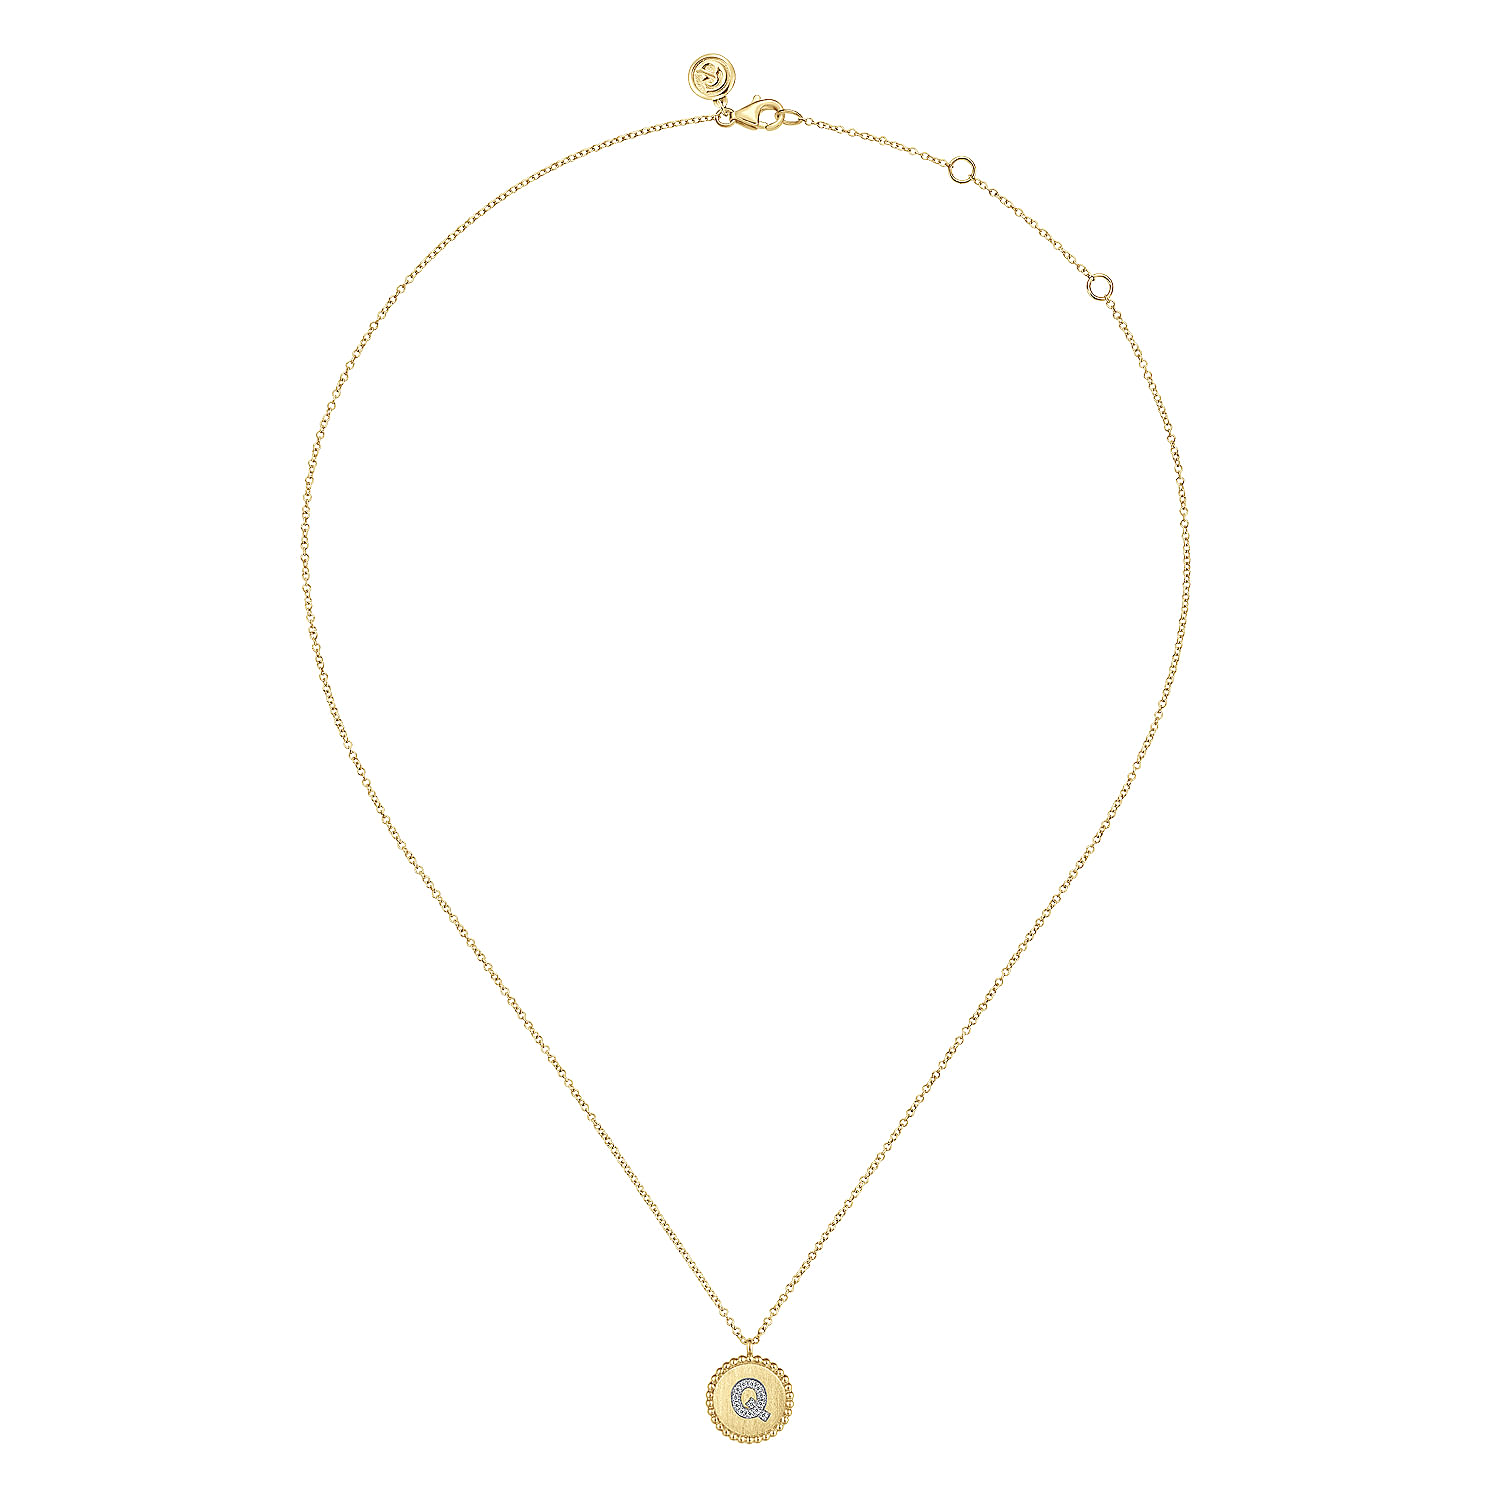 14K Yellow Gold Round Q Initial Pendant Necklace with Diamonds